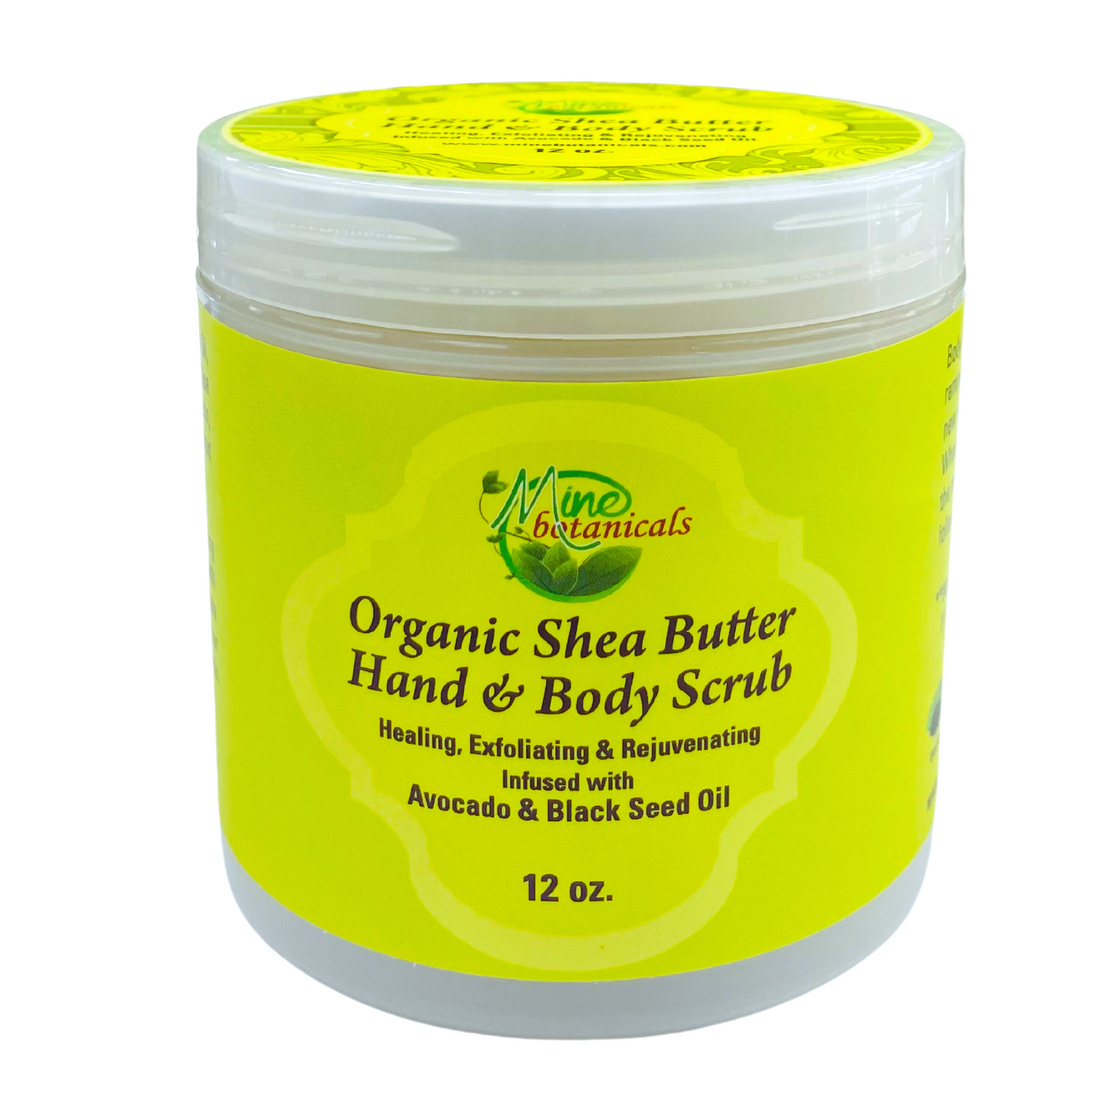 Body Scrub Infused with Organic Shea Butter